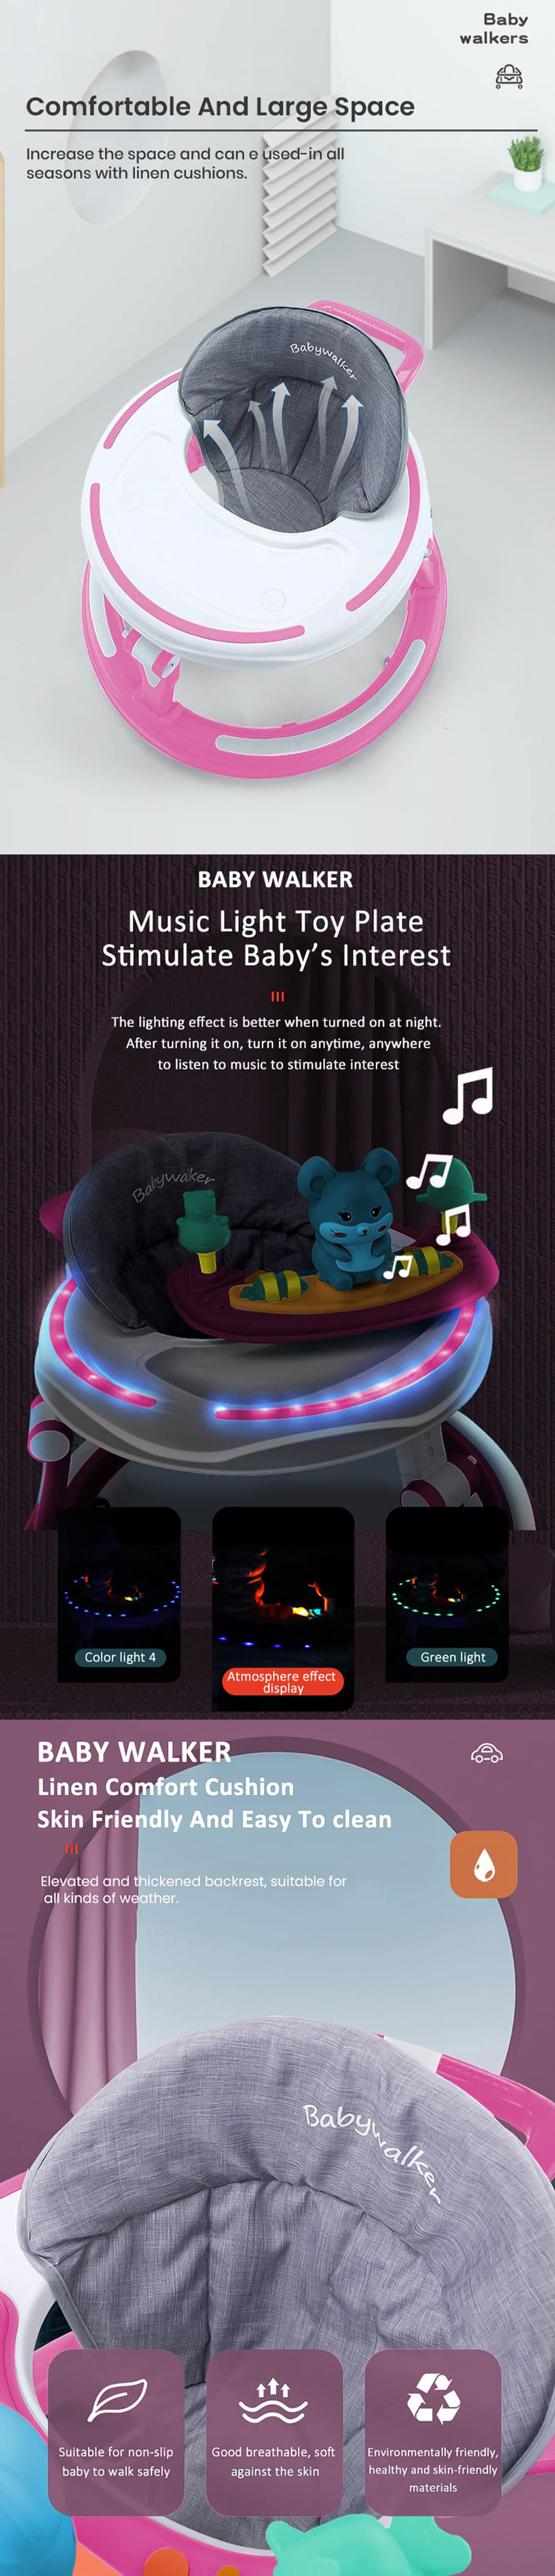 Intelligent Baby Walker with musical light